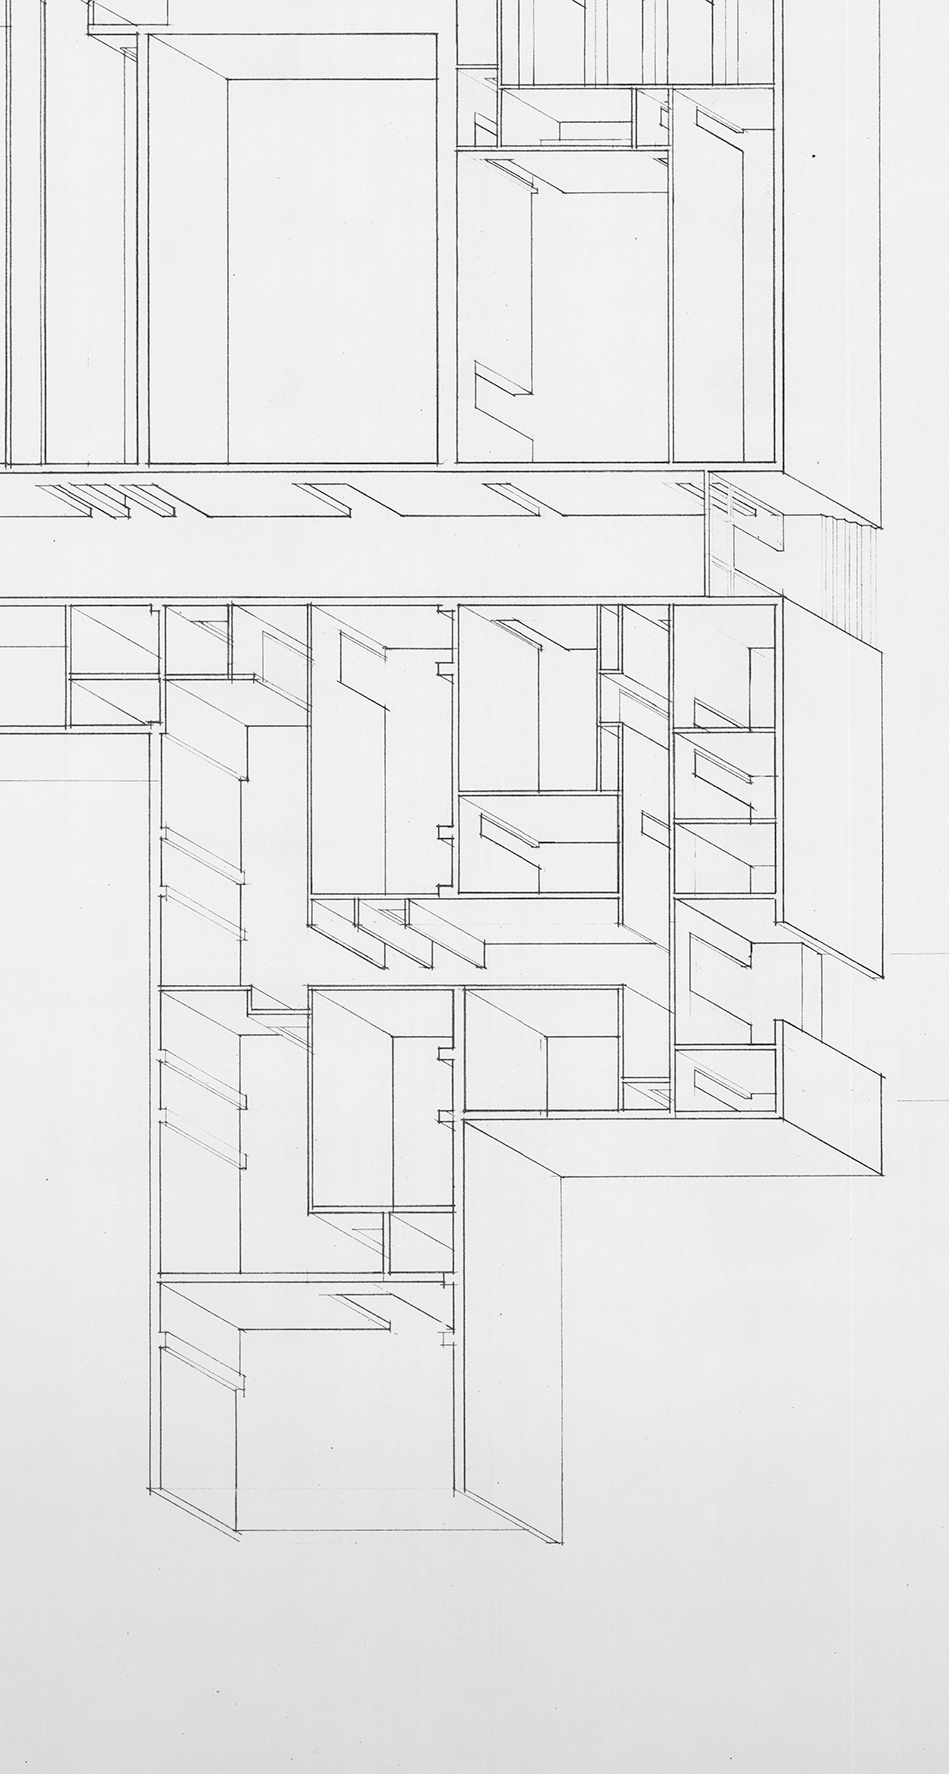 Isometric Drawing in Pencil of Lodge, John Yeon architectural drawings, 1934-1976